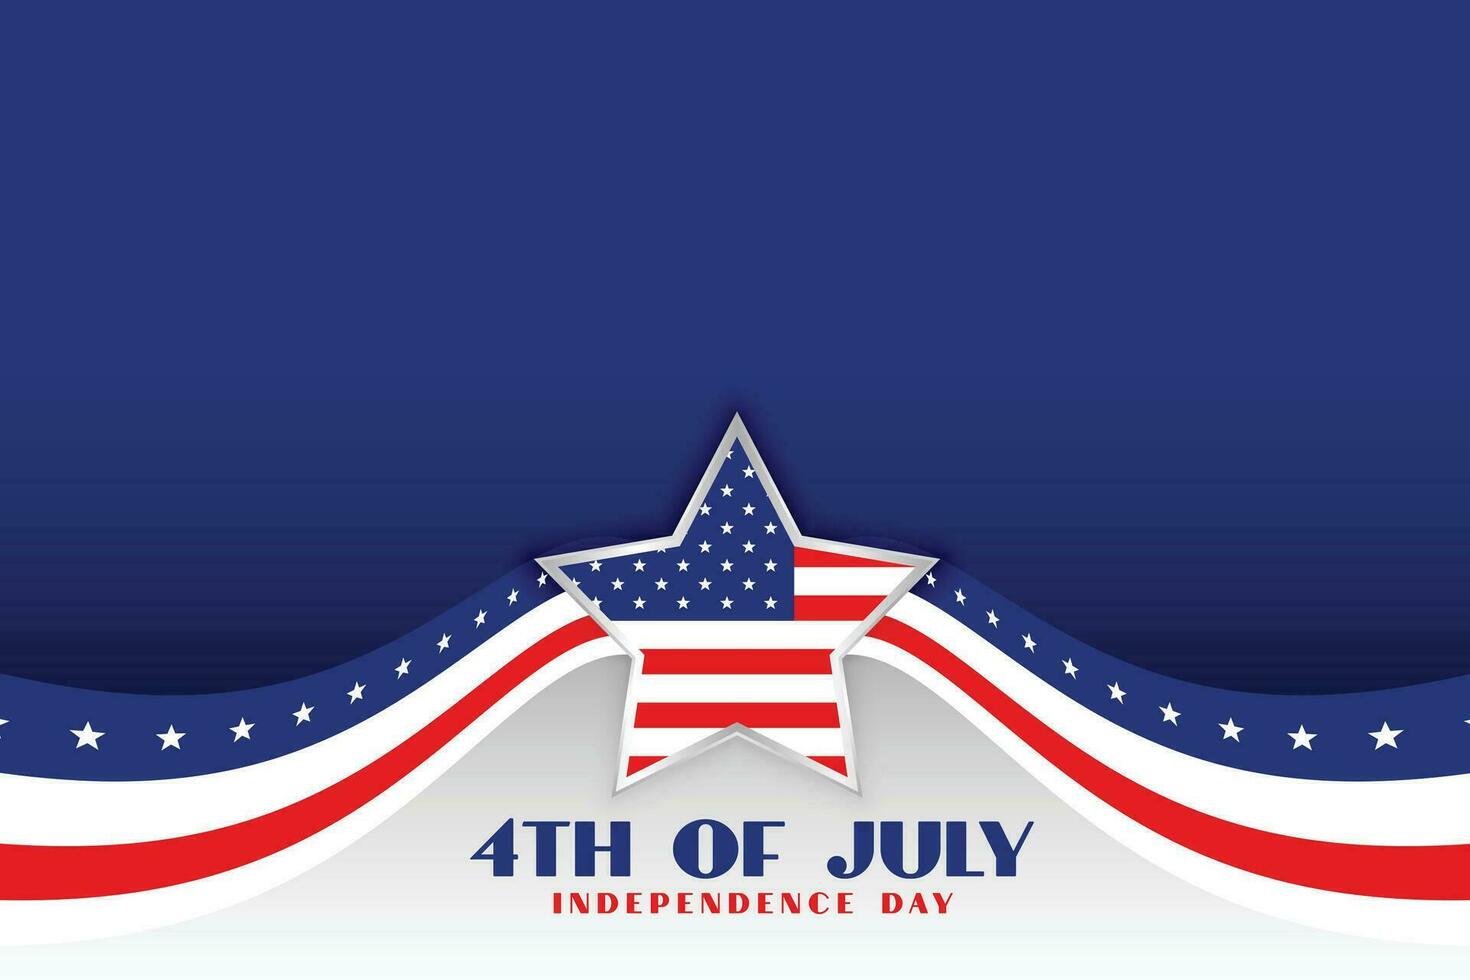 independence day 4th of july patriotic background vector